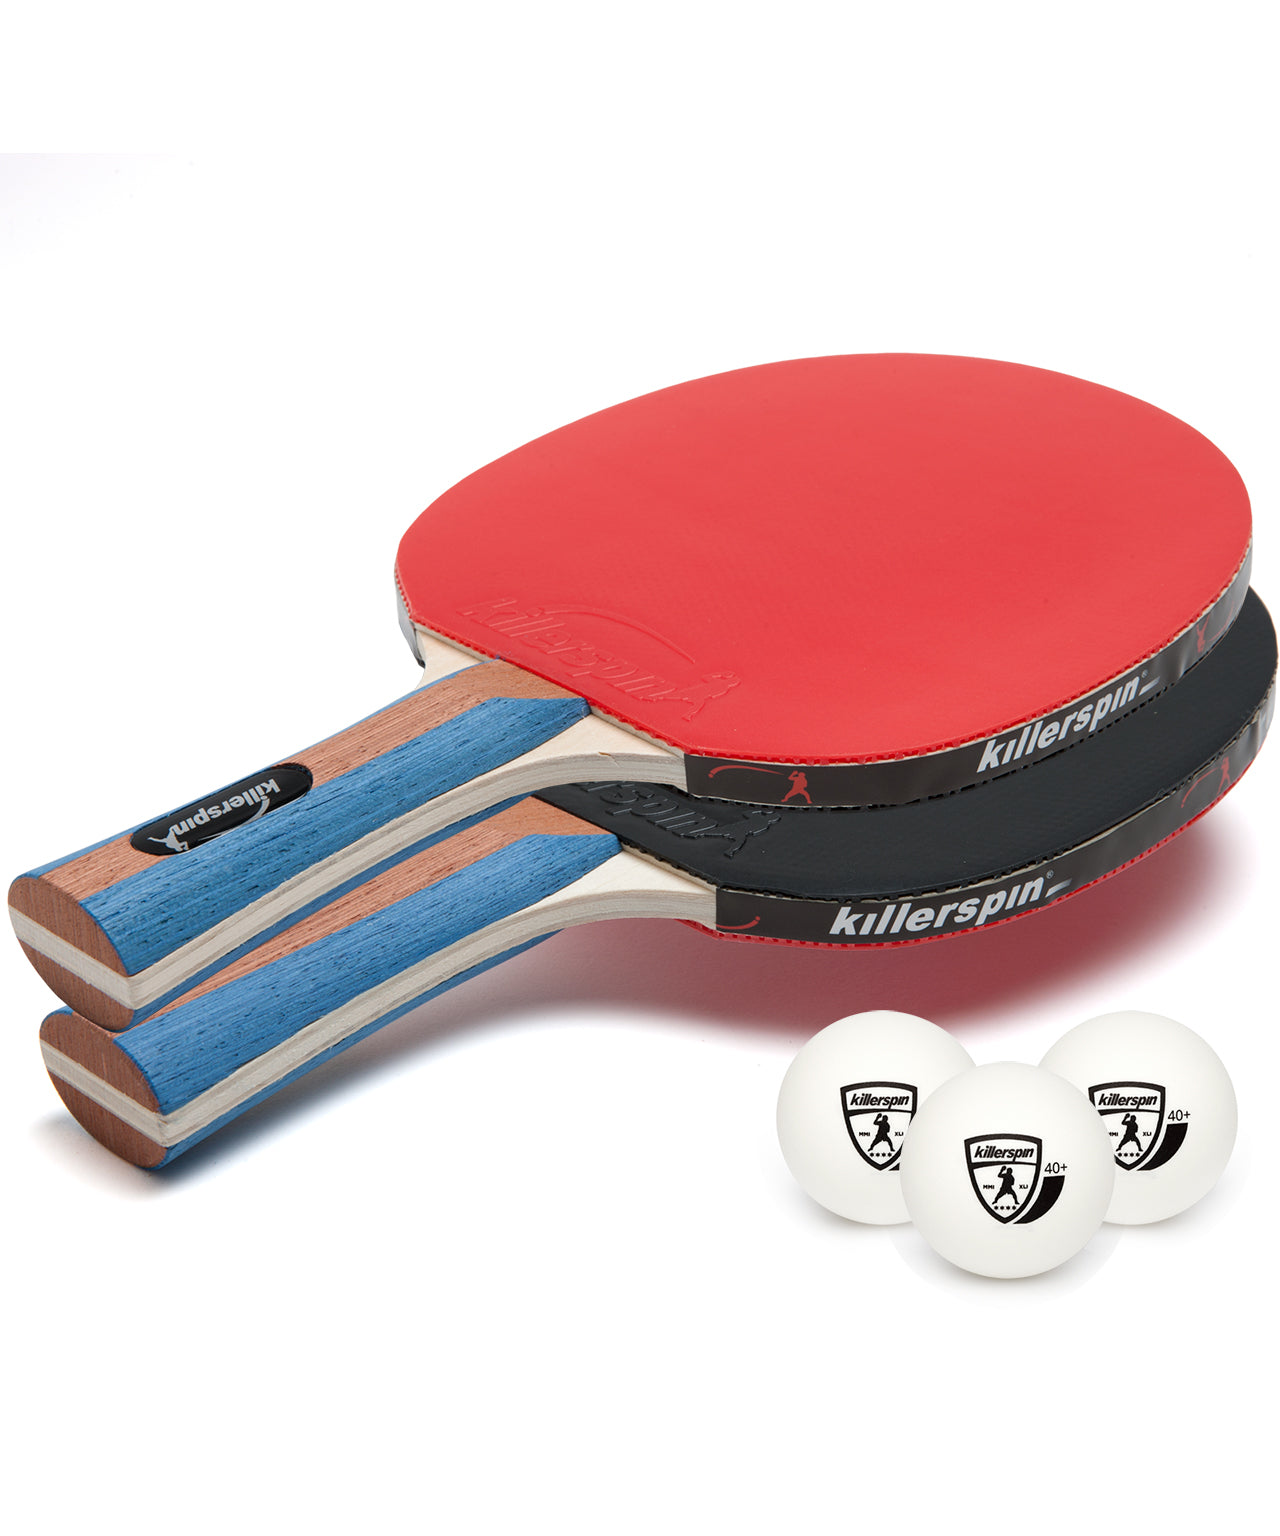 Killerspin Jetset 2 Table Tennis Set With Ping Pong Paddles and 3 Balls Indoor for sale online eBay